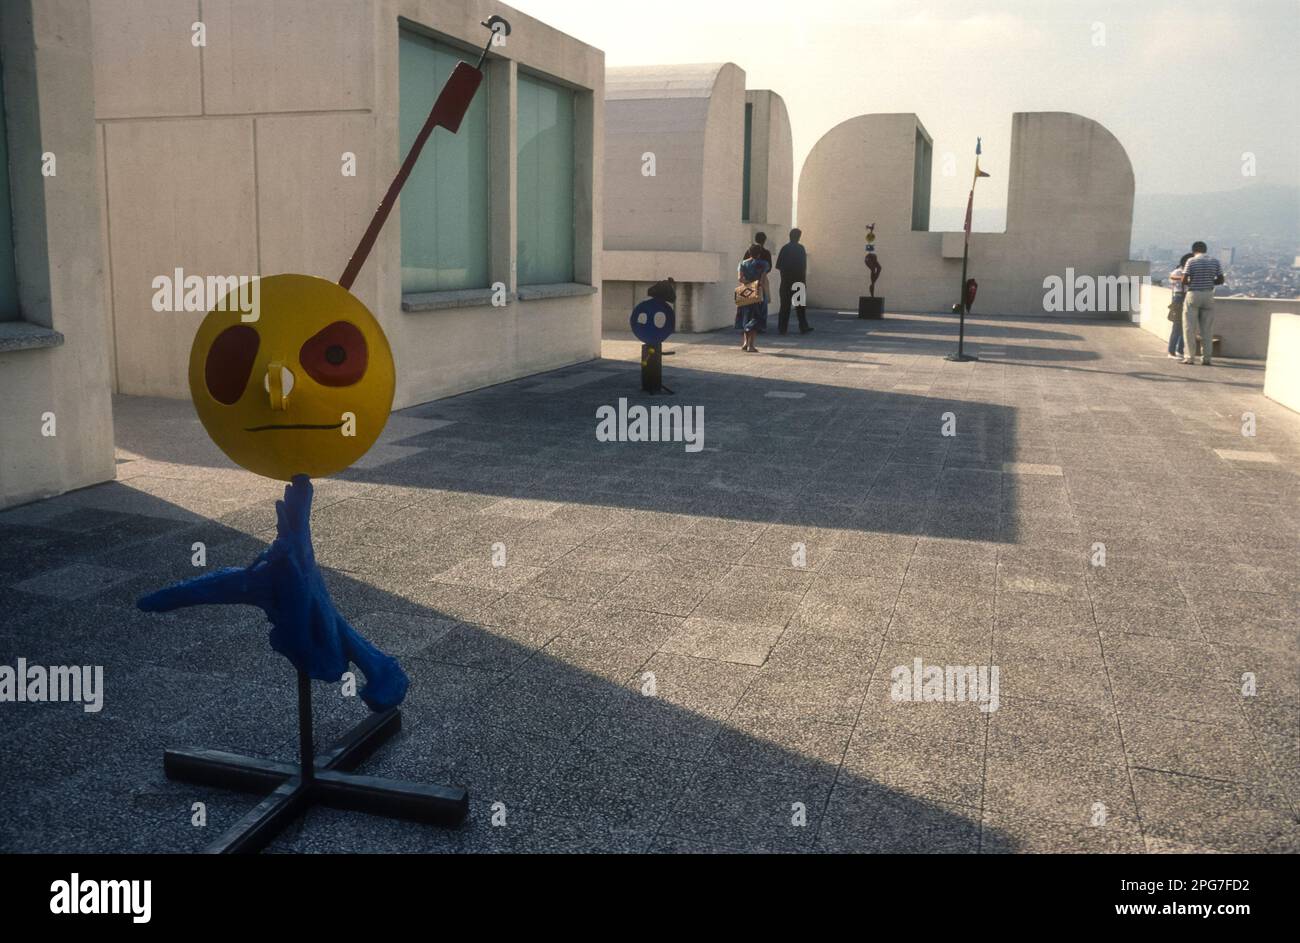 The Fundació Joan Miró on Montjuïc, Barcelona was designed by Josep Lluís Sert and opened in 1975. Stock Photo